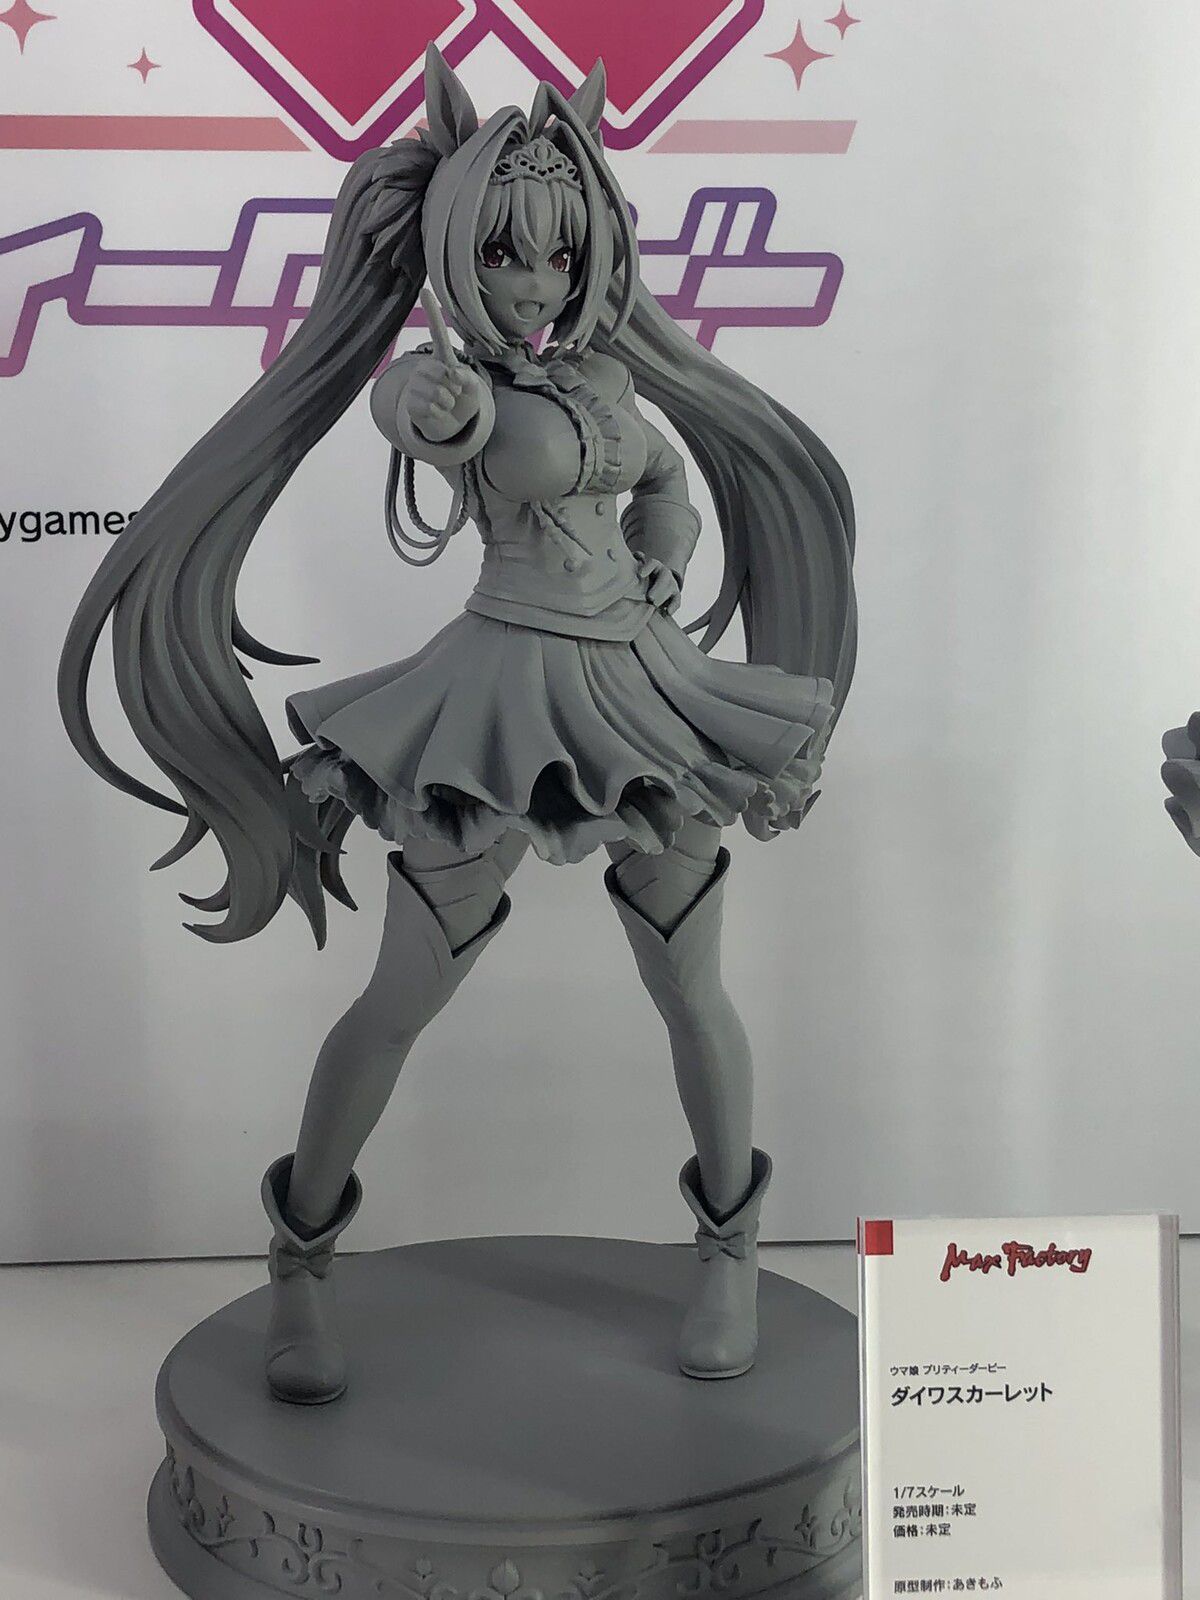 When I look at the prototype of the figure of [Uma Musume] Daiwa Scarlet from below, the thighs and spats are too erotic 7